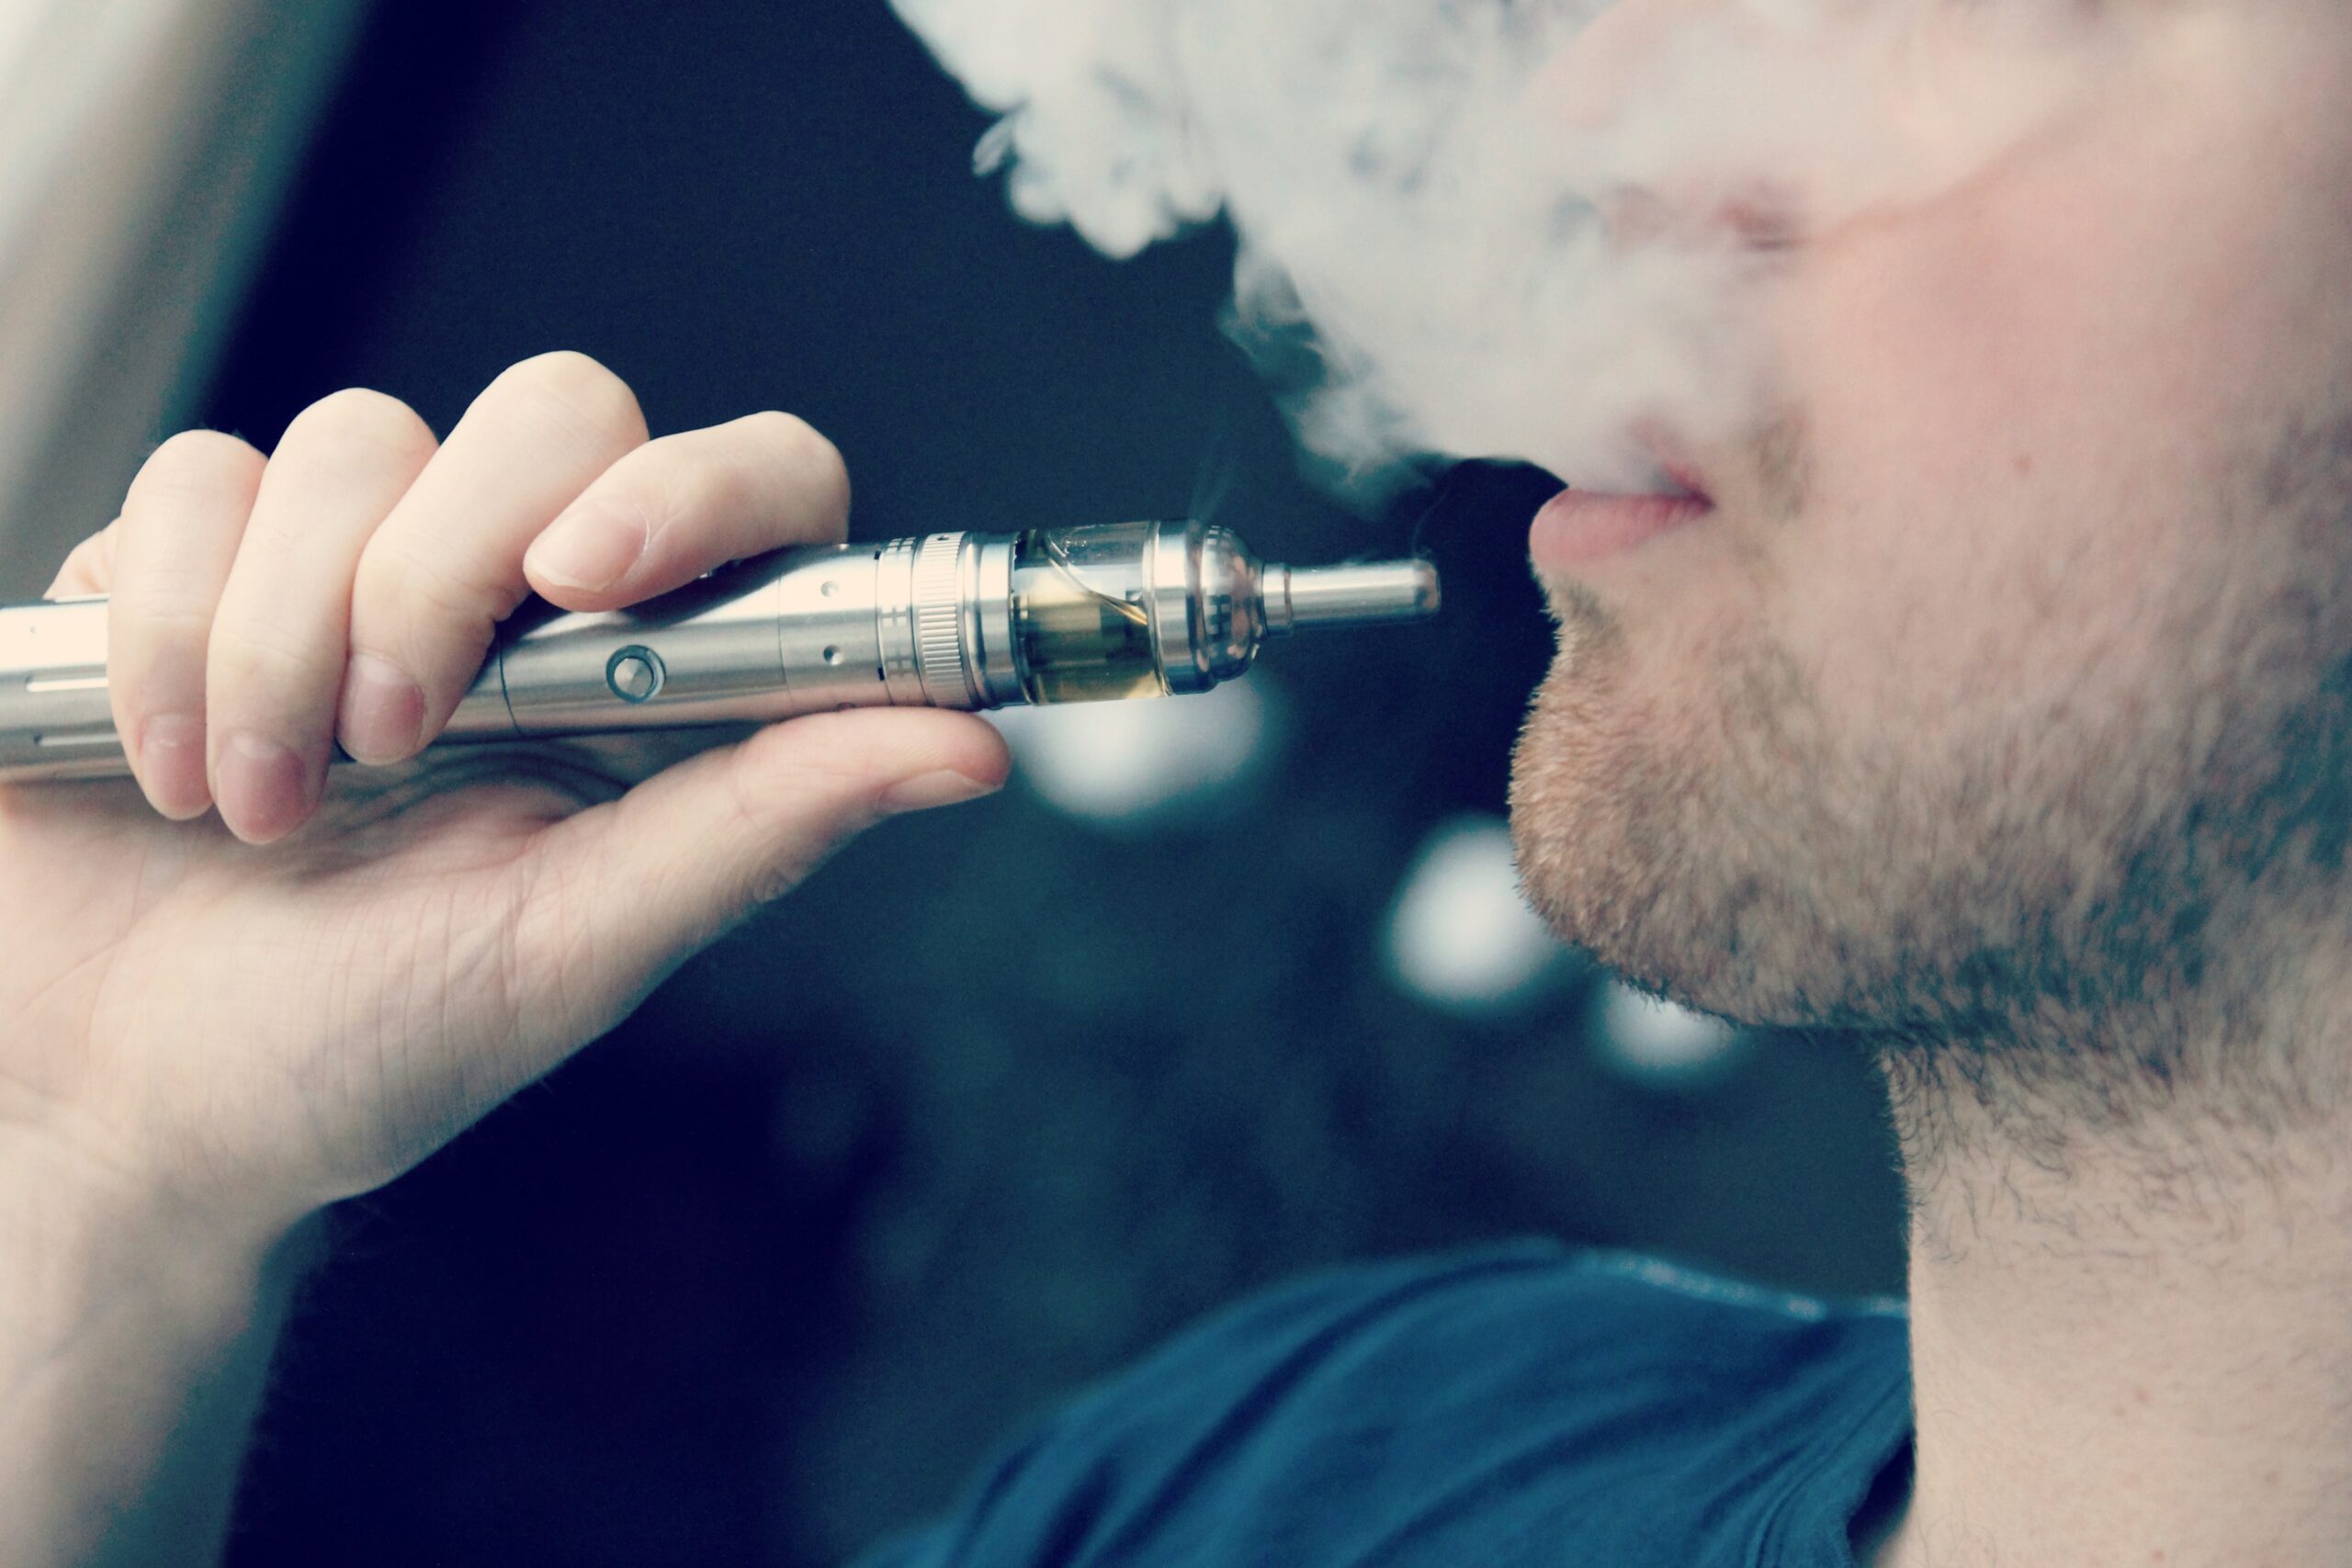 Wisconsin Health Officials Still Investigating Cause Of Lung Disease Among E-Cigarette Users